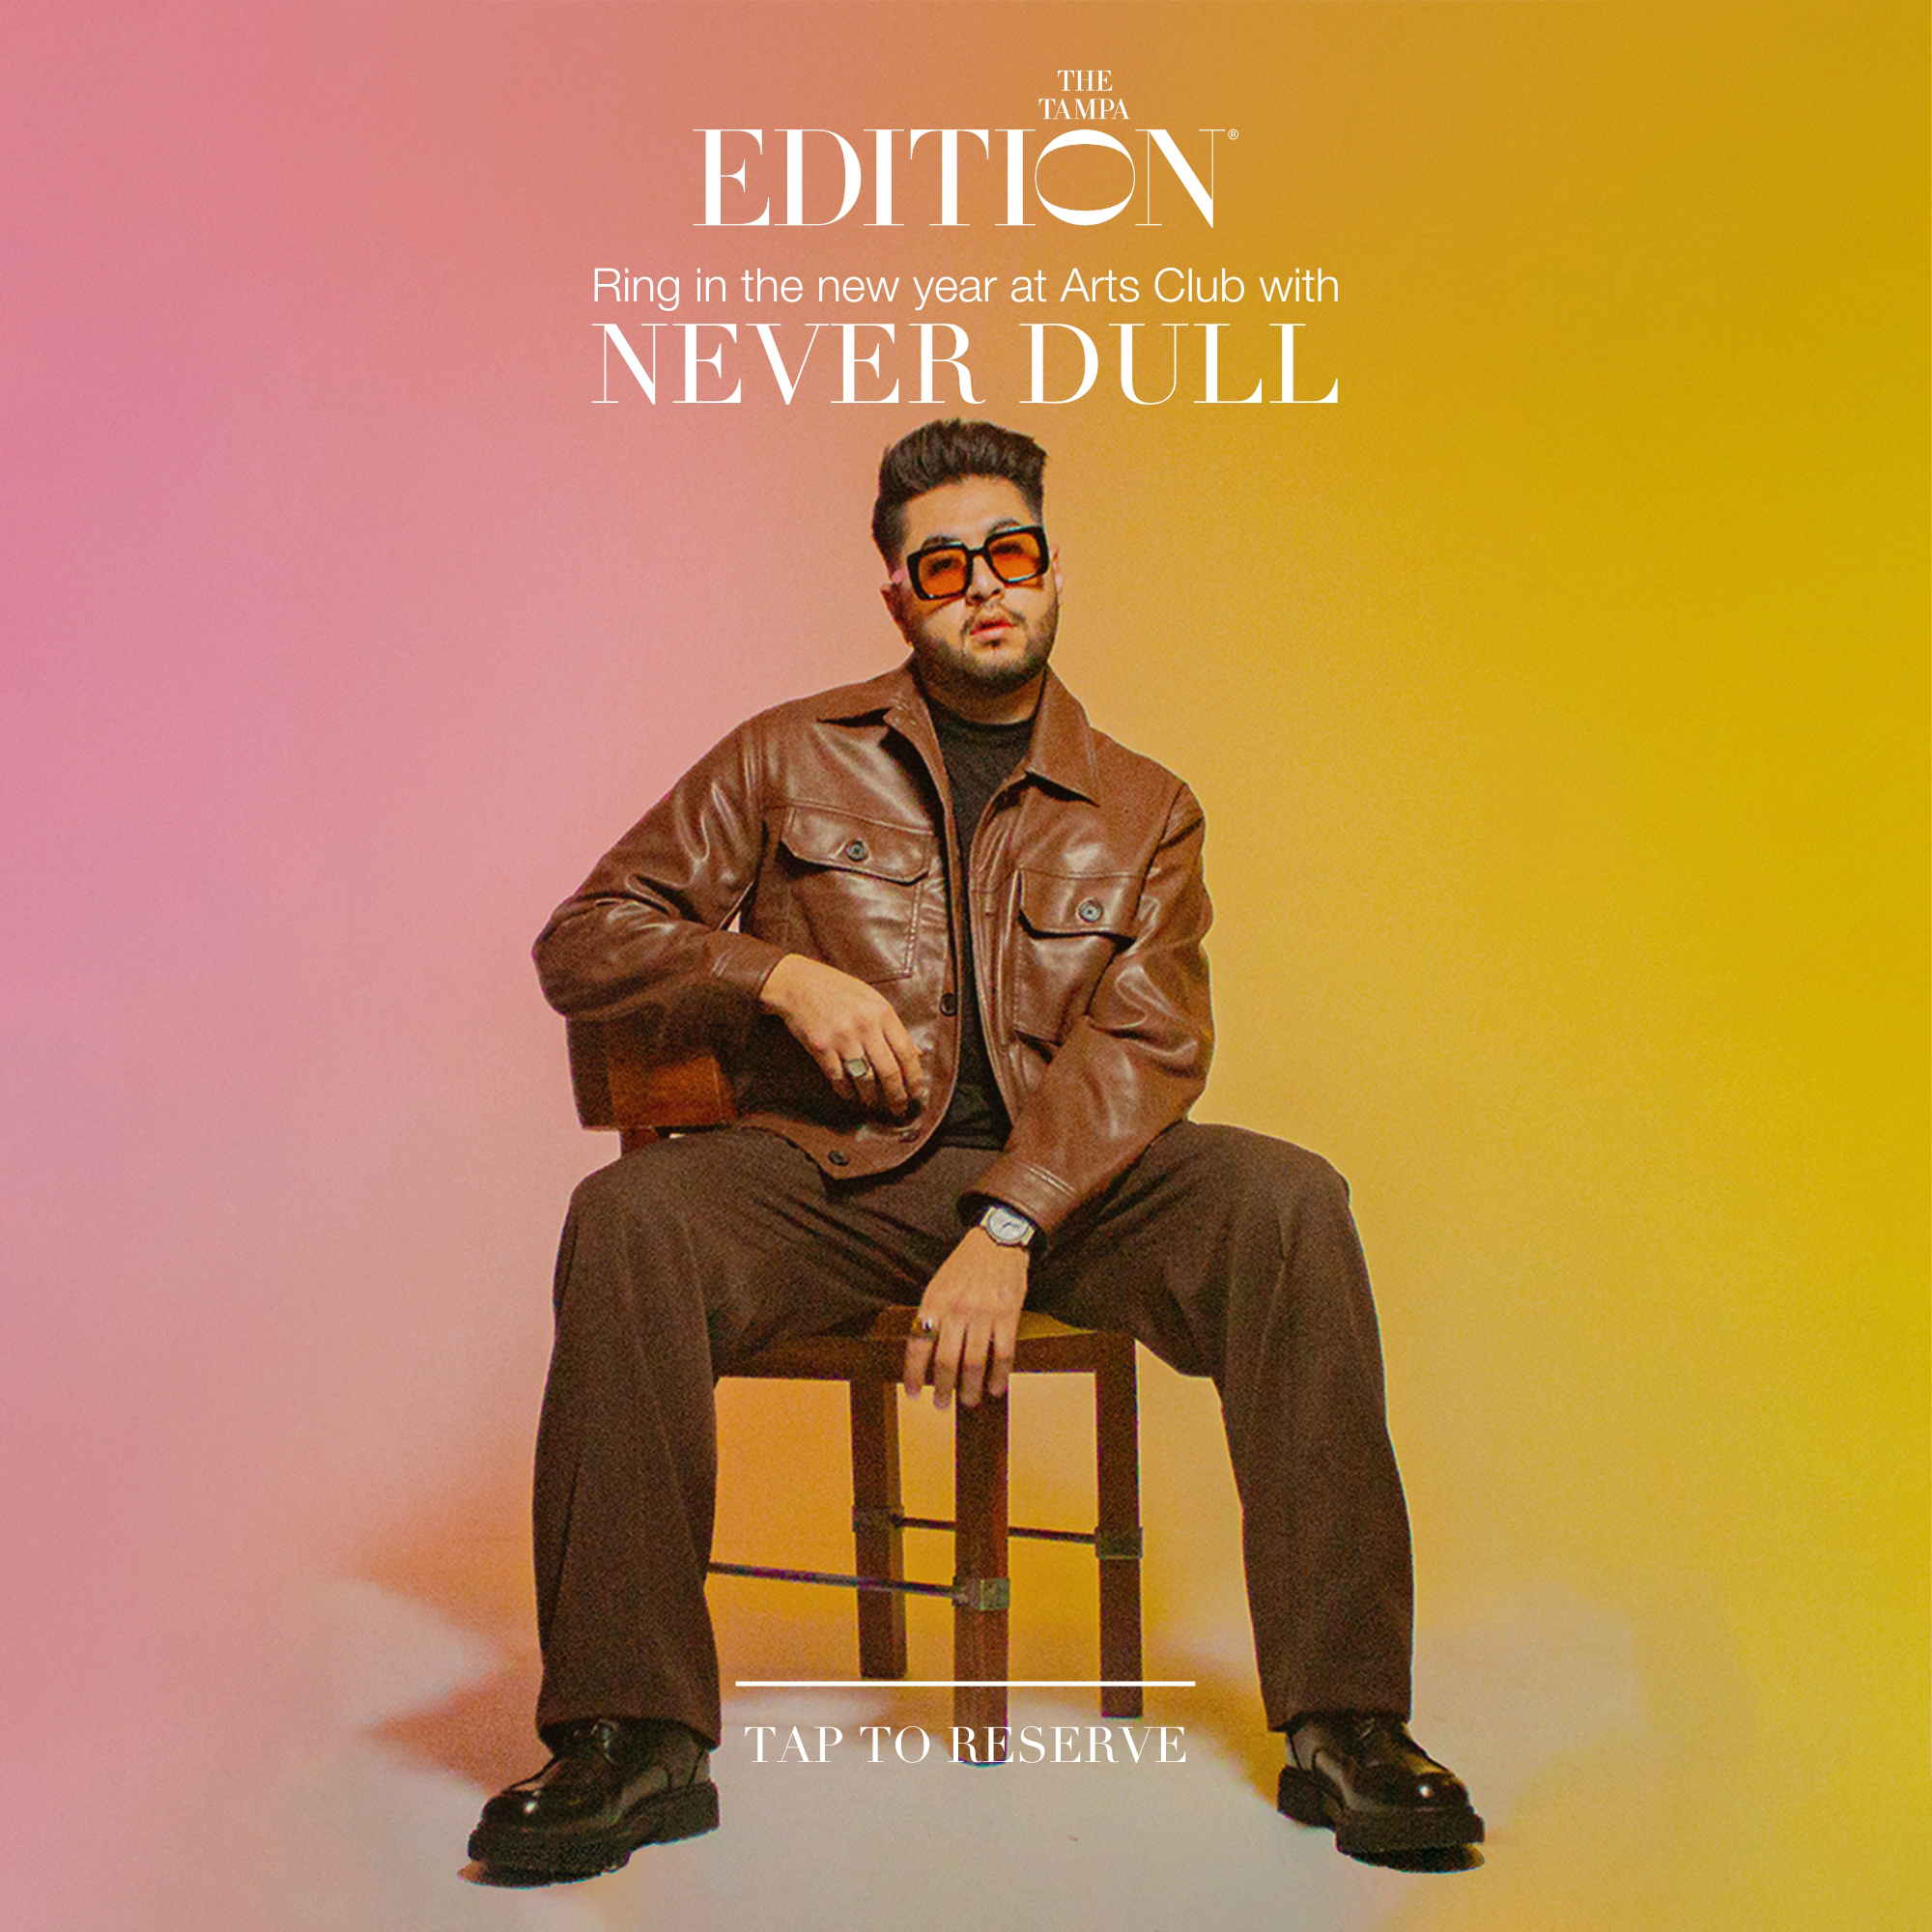 Never Dull – Artists